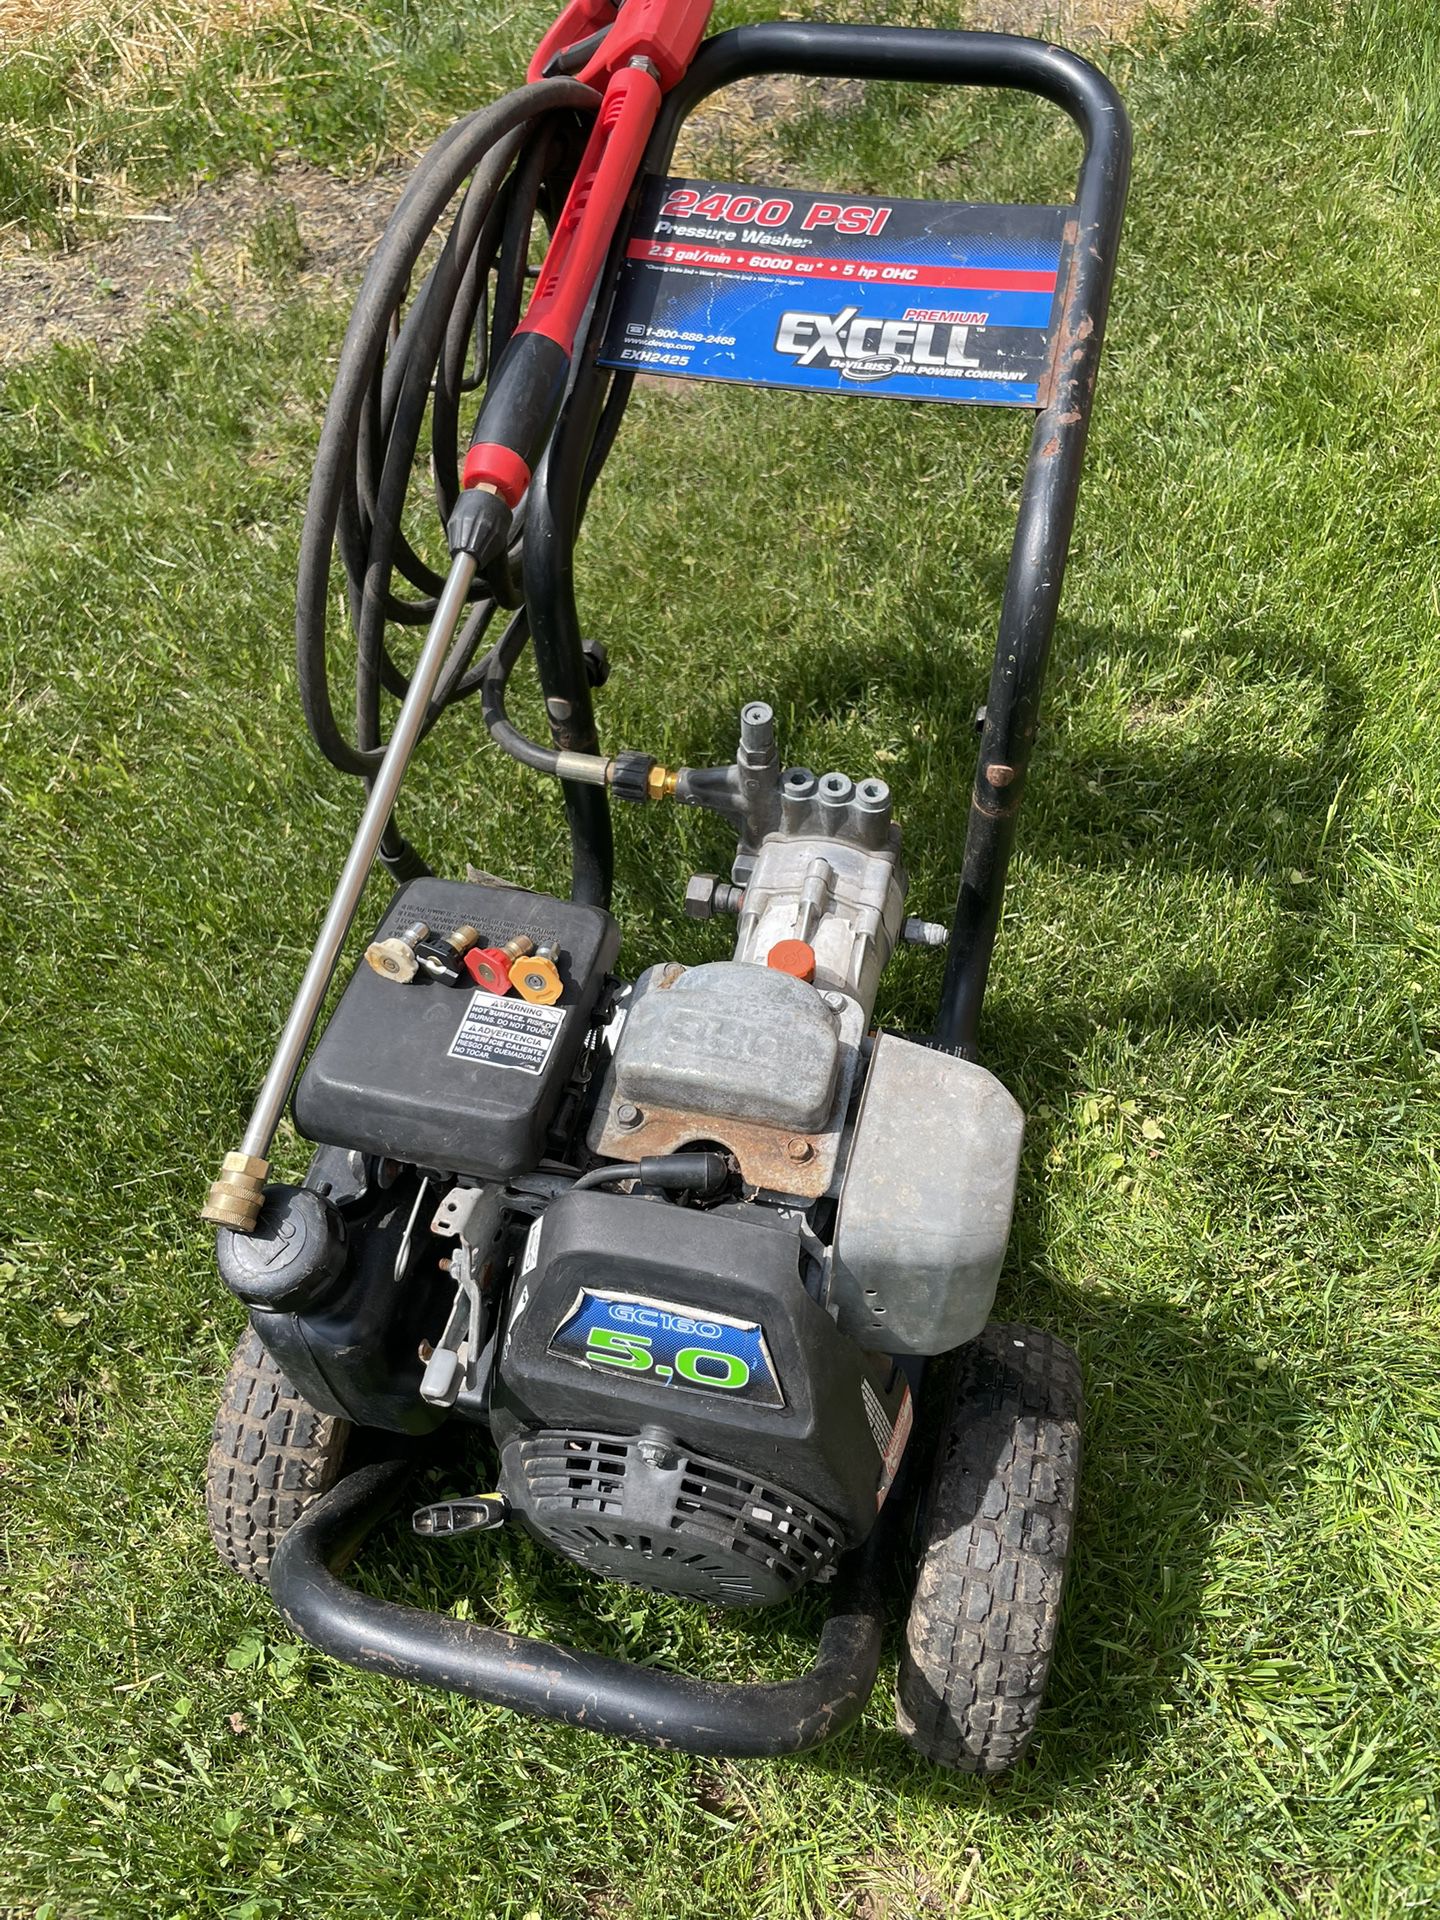 Excell 2400 psi Gas Powered Pressure Washer - Power Washer